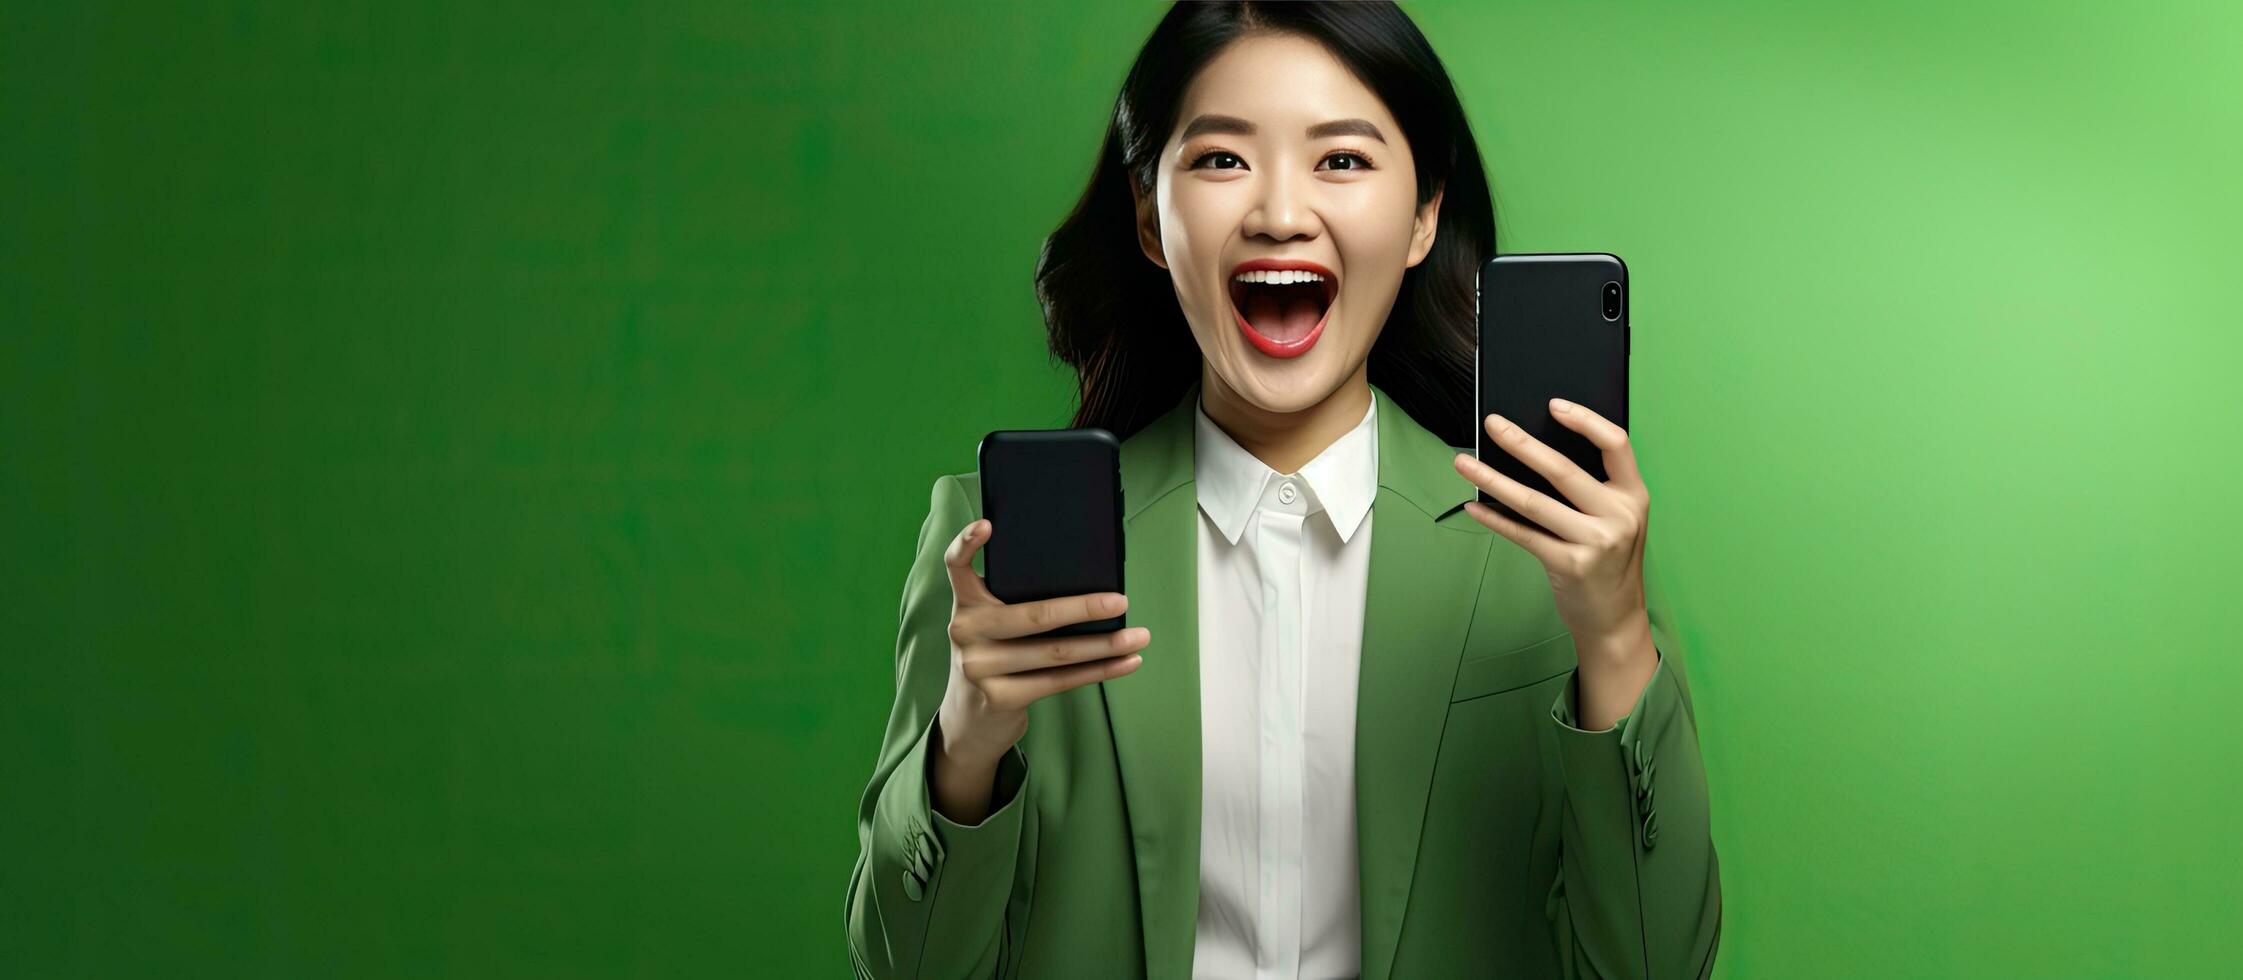 Asian woman sharing great news with a mobile phone displaying a blank white screen against a vibrant green background photo